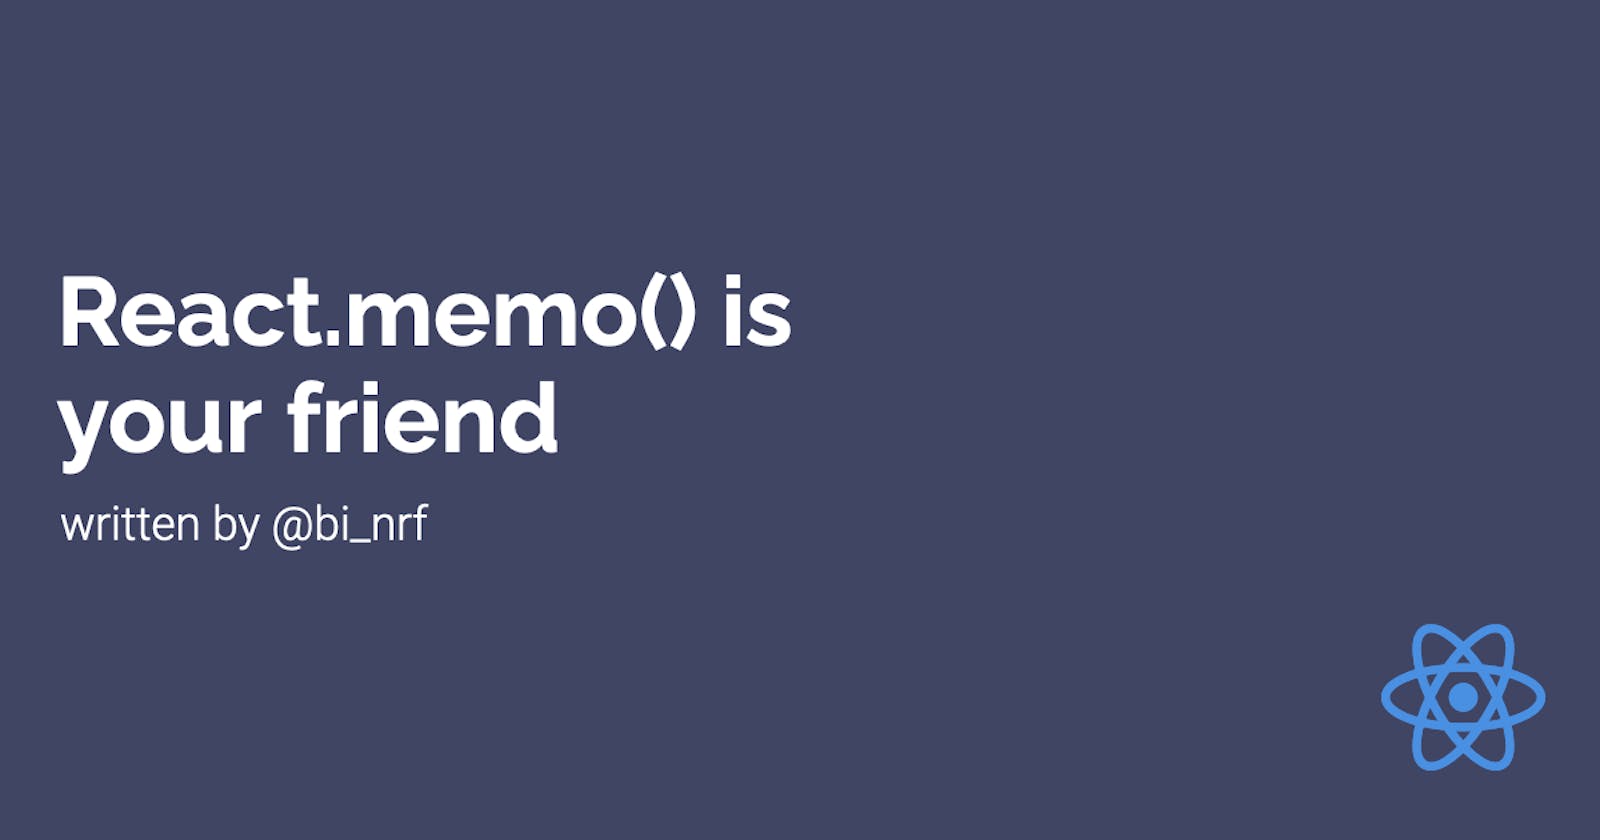 React.memo() is your friend